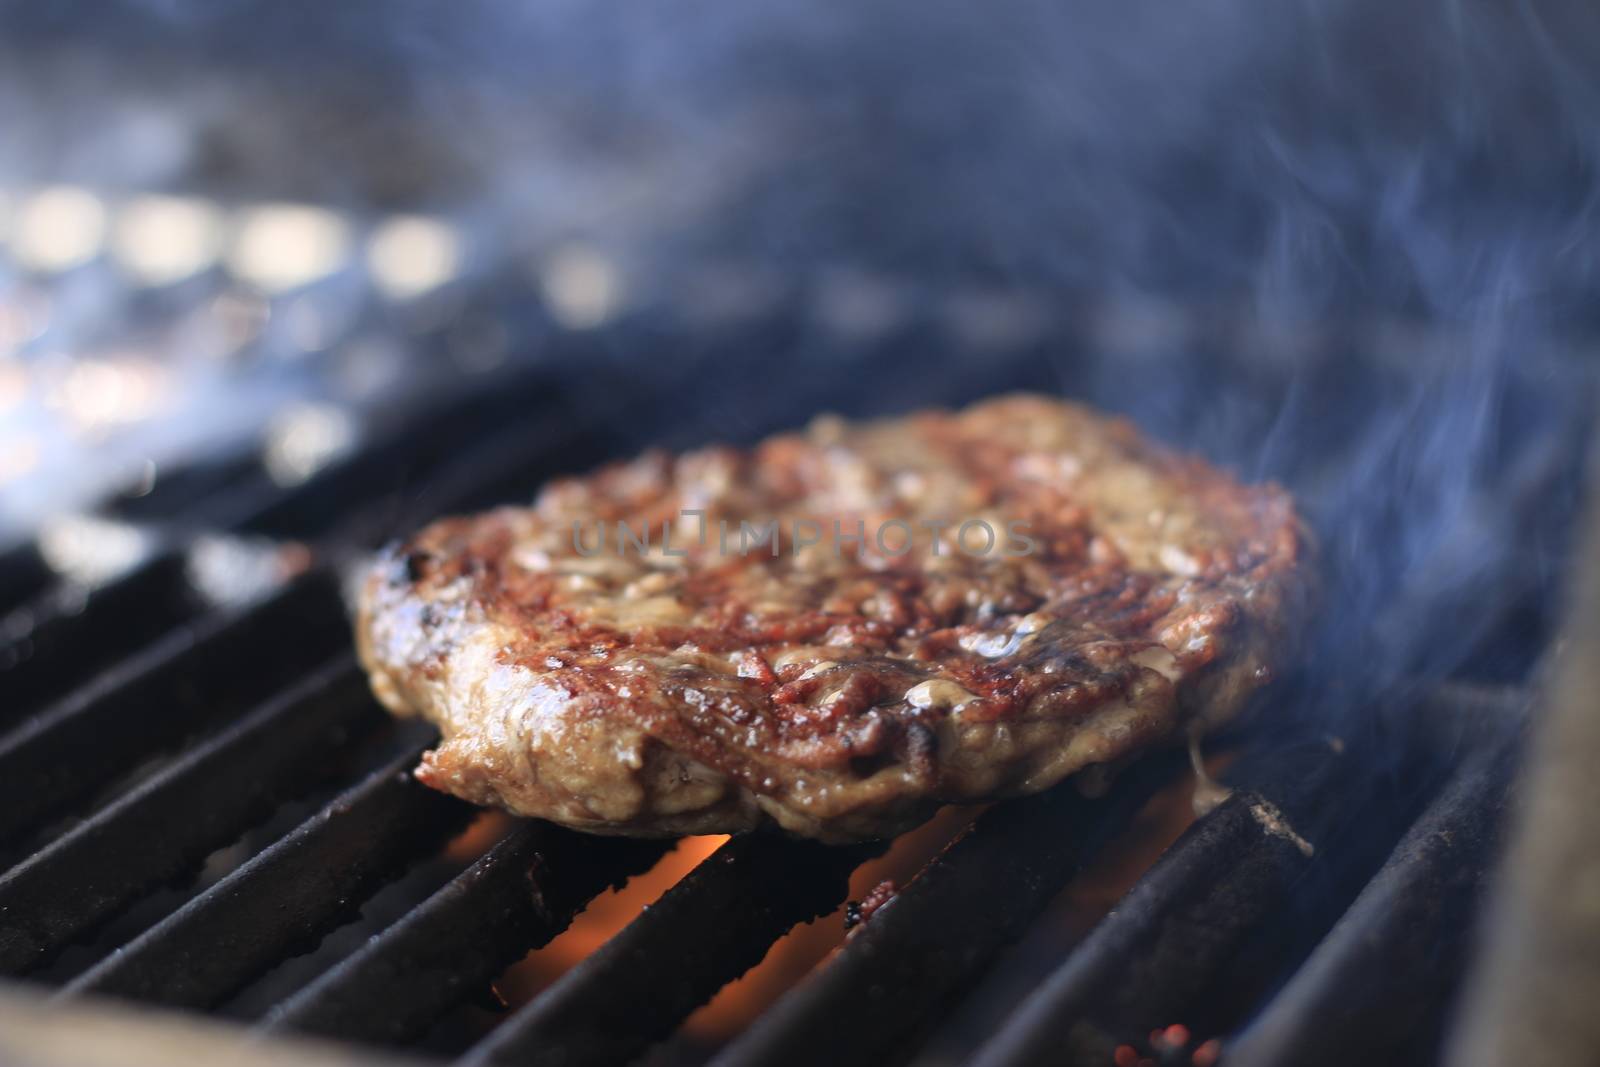 Burgers. Hamburgers being flame broiled on the gas grill by mynewturtle1